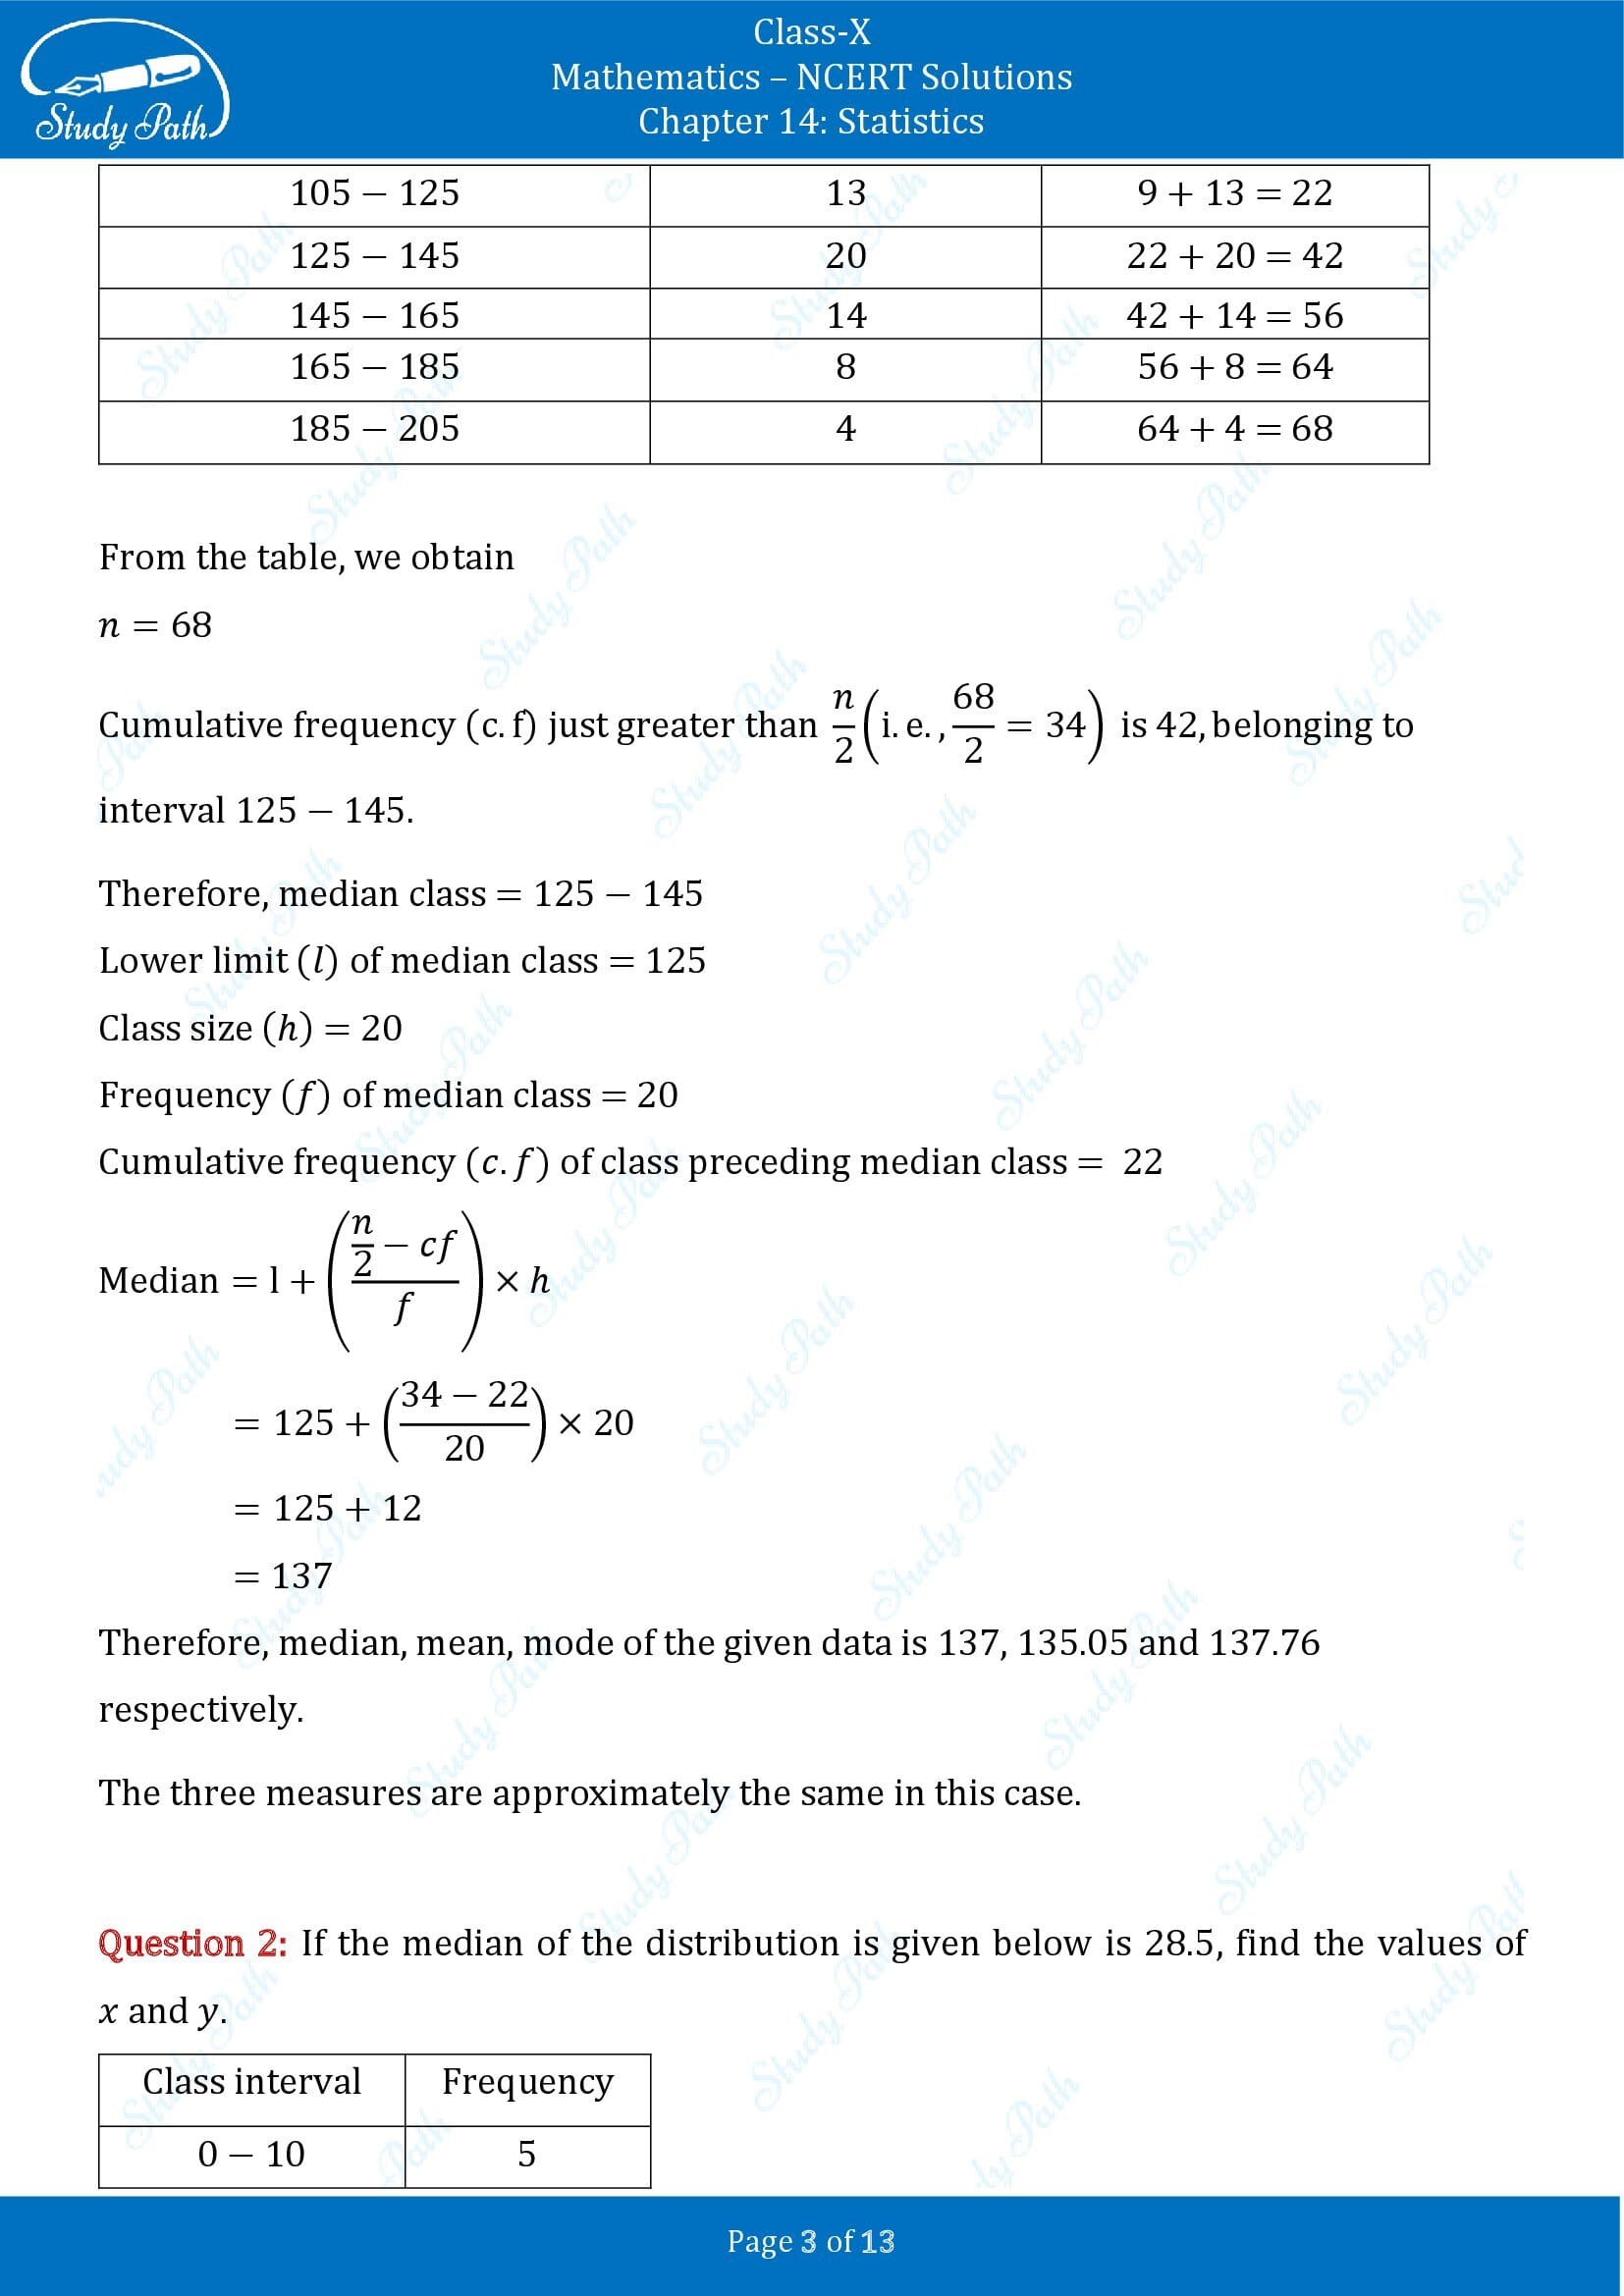 NCERT Solutions for Class 10 Maths Chapter 14 Statistics Exercise 14.3 00003